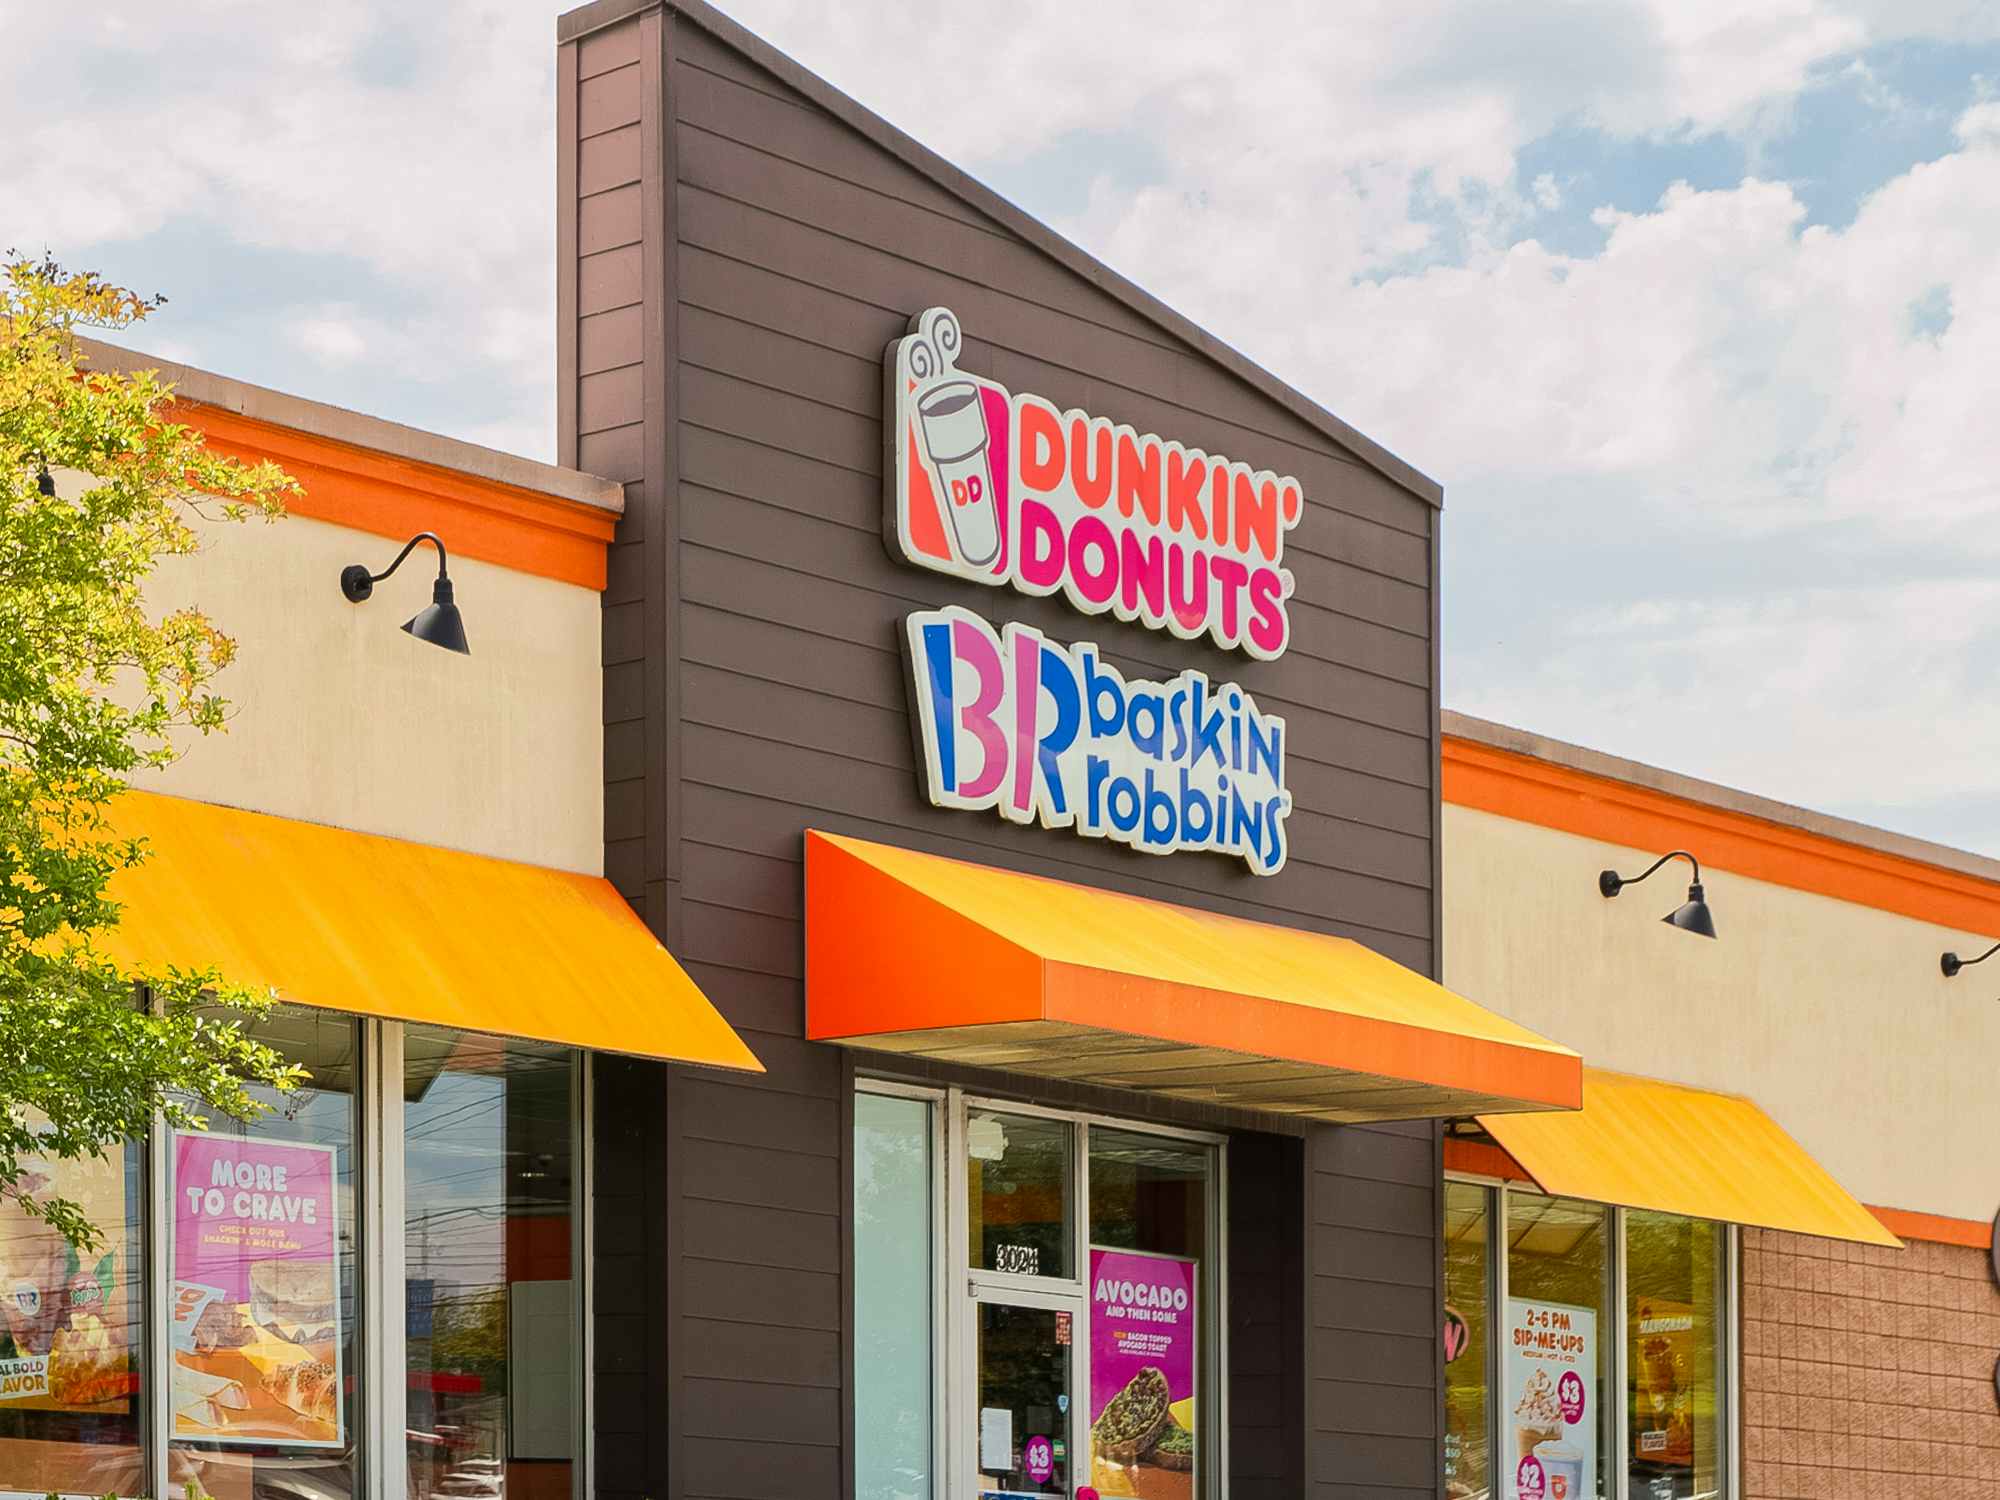 The exterior of a Baskin Robbins and Dunkin Donuts combination restaurant